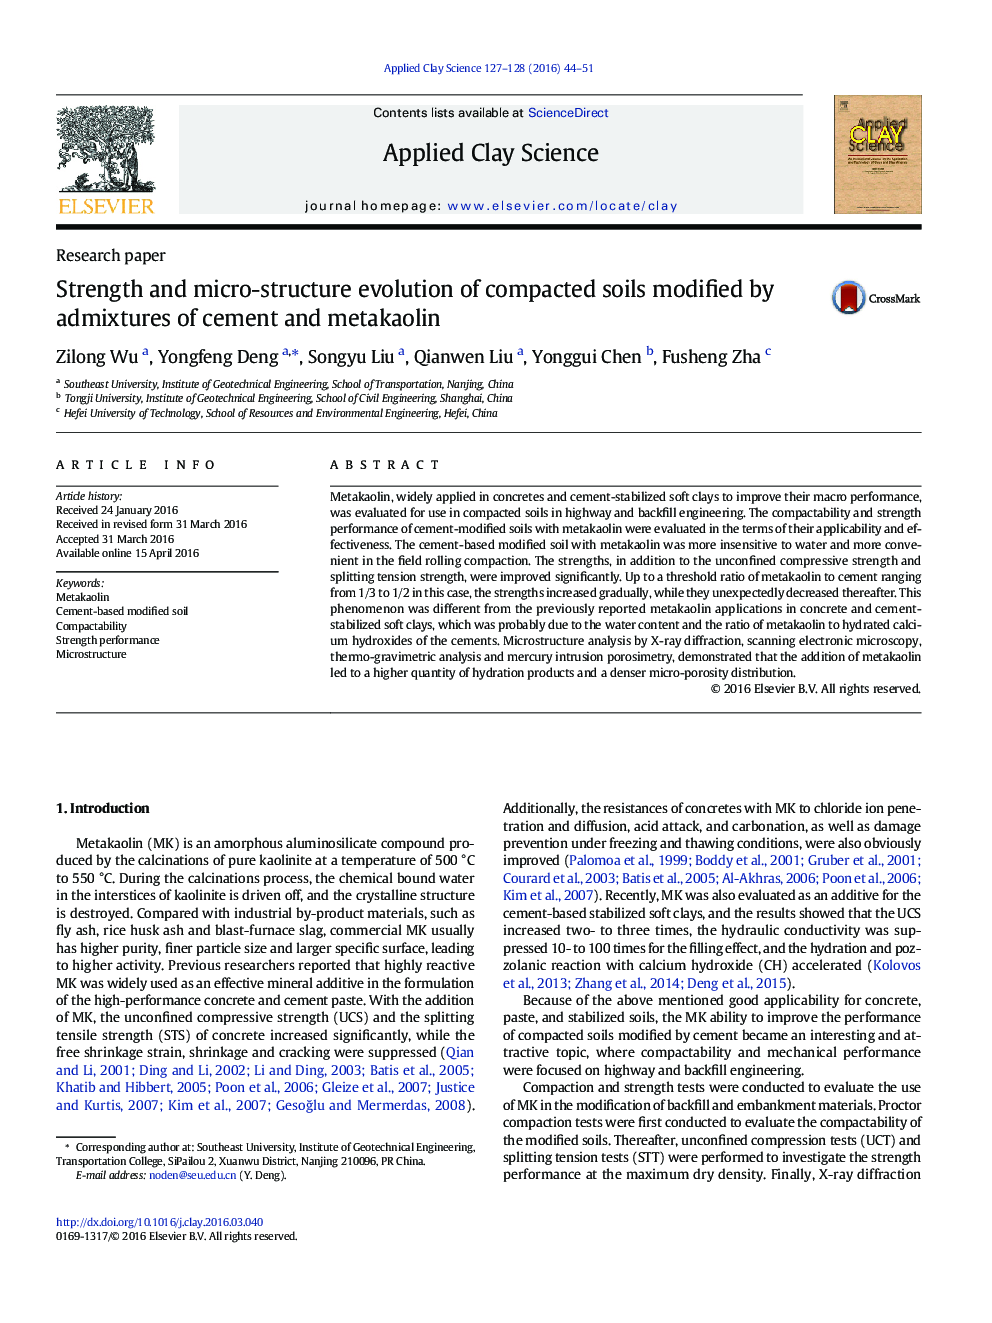 Strength and micro-structure evolution of compacted soils modified by admixtures of cement and metakaolin